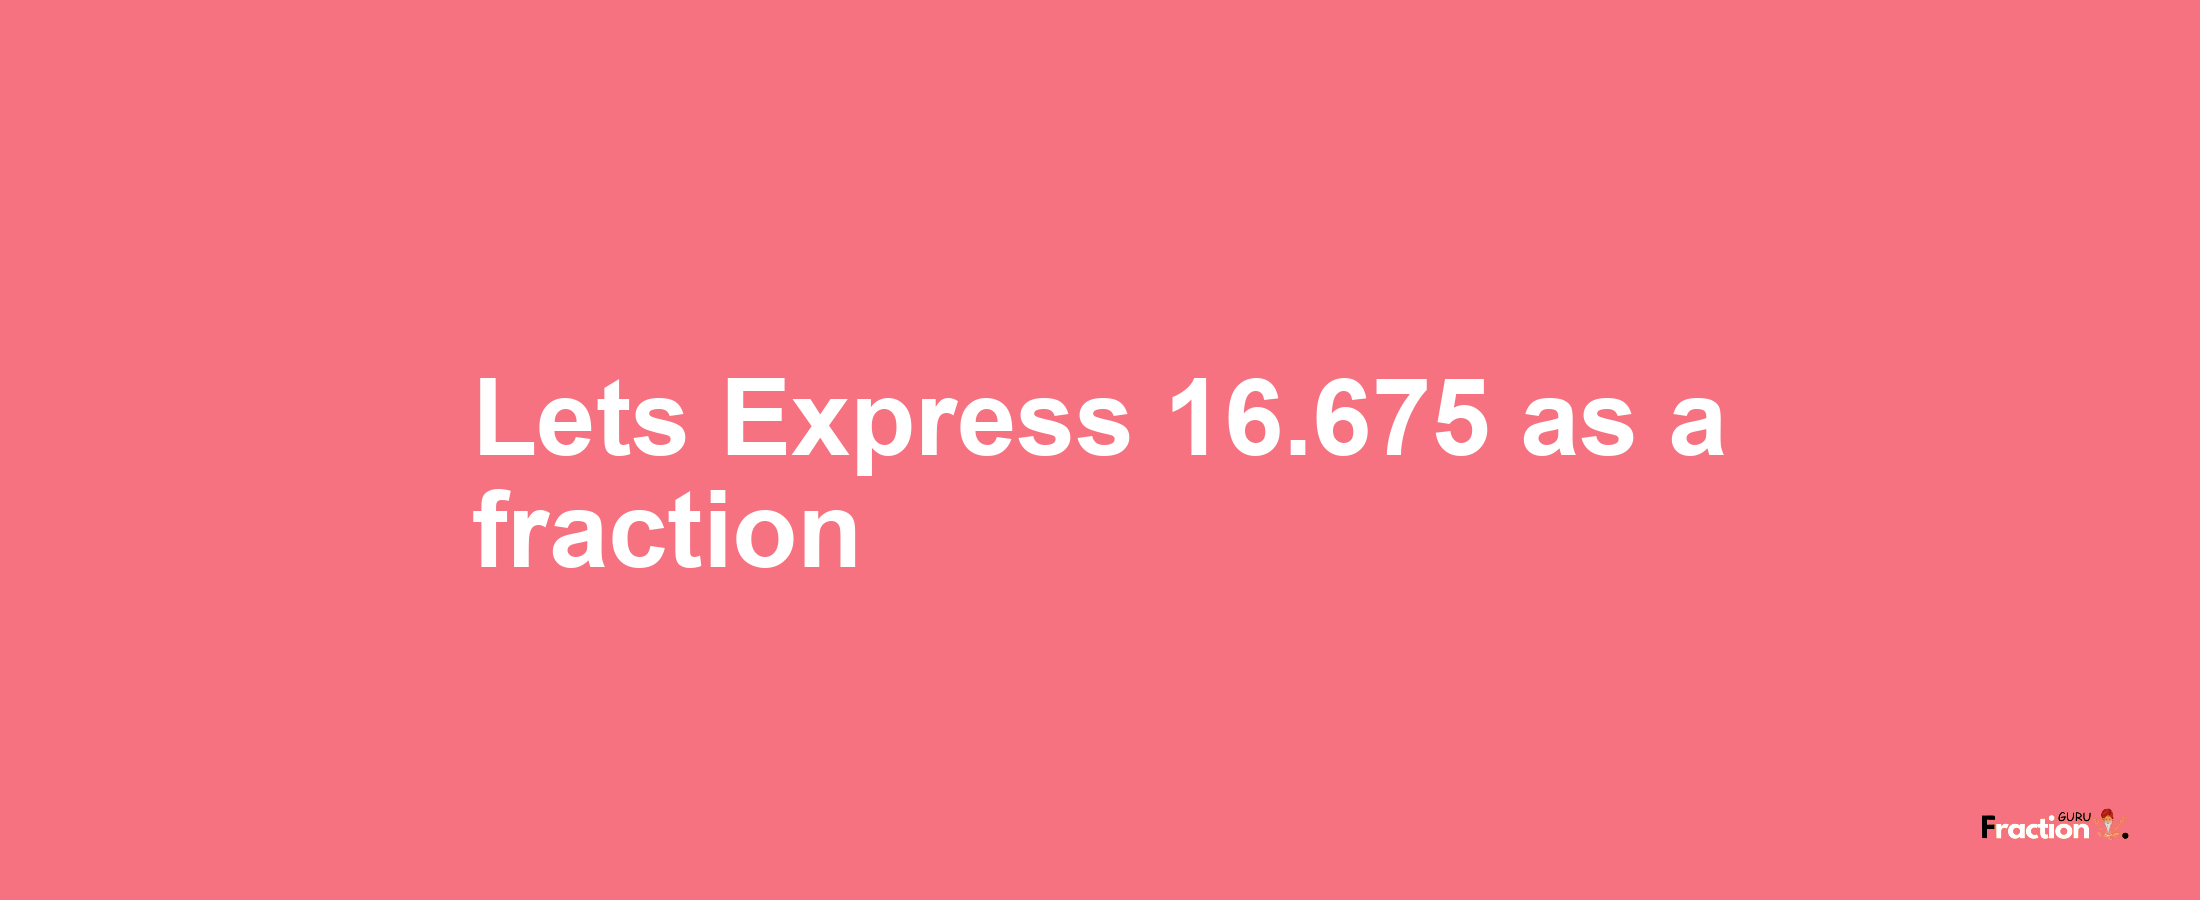 Lets Express 16.675 as afraction